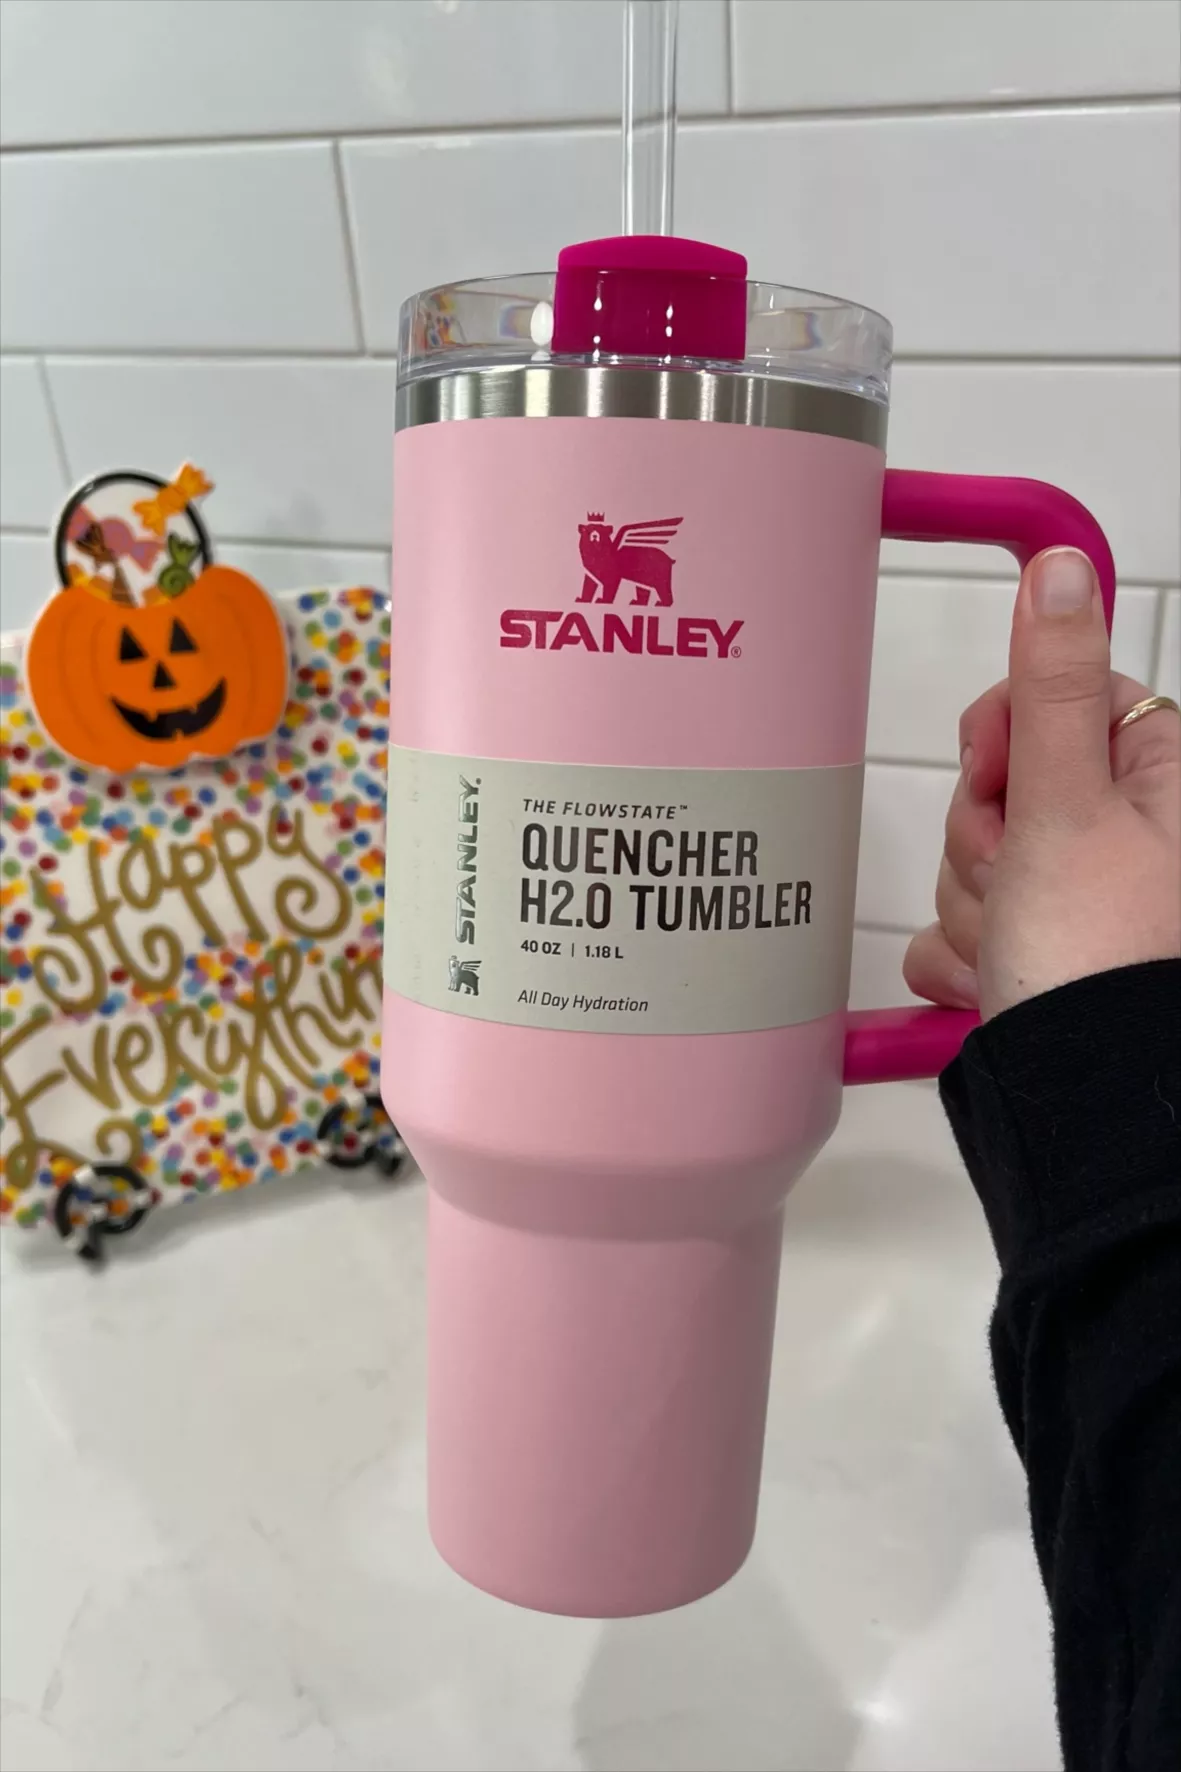  Hot Pink Stanley Cup